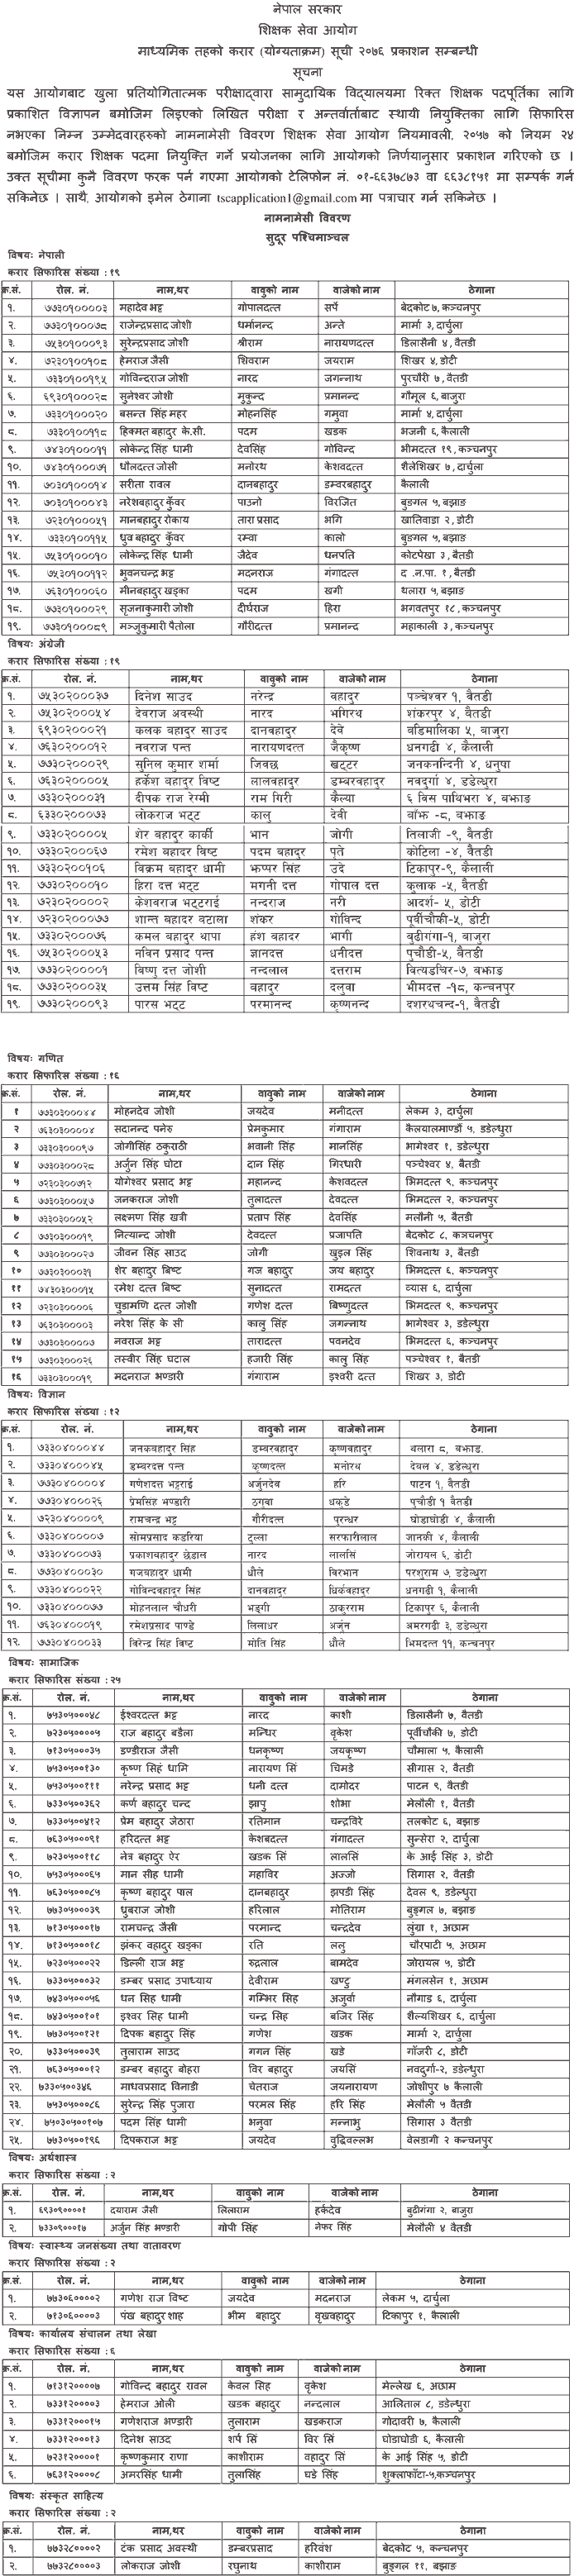 Secondary Level Far-Western Region Eligible Candidates name list for Contract